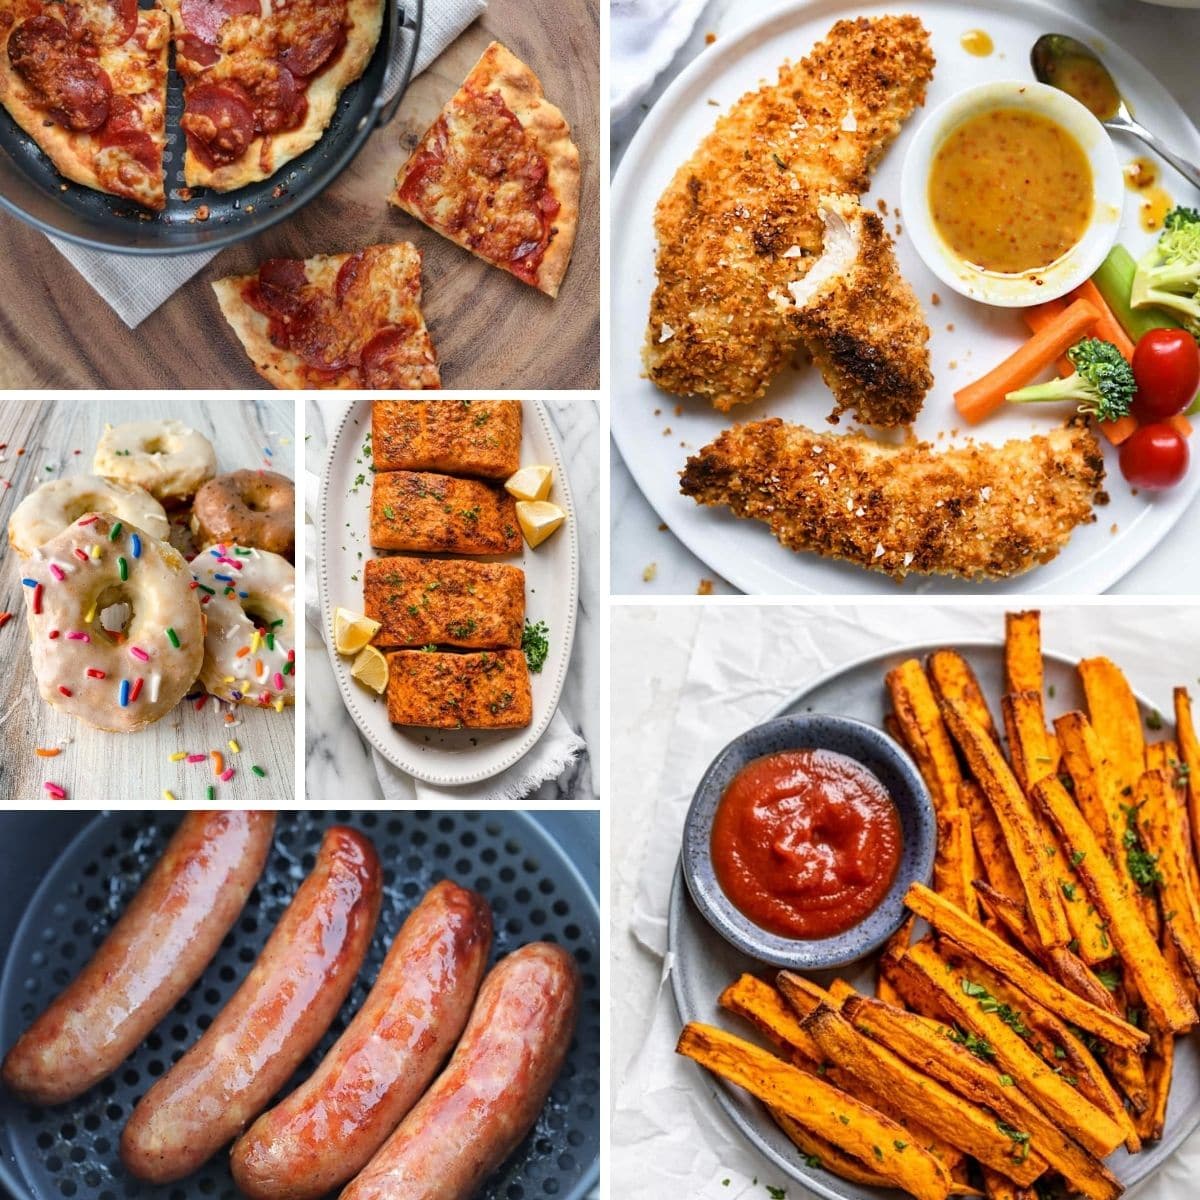 Collage image of various foods